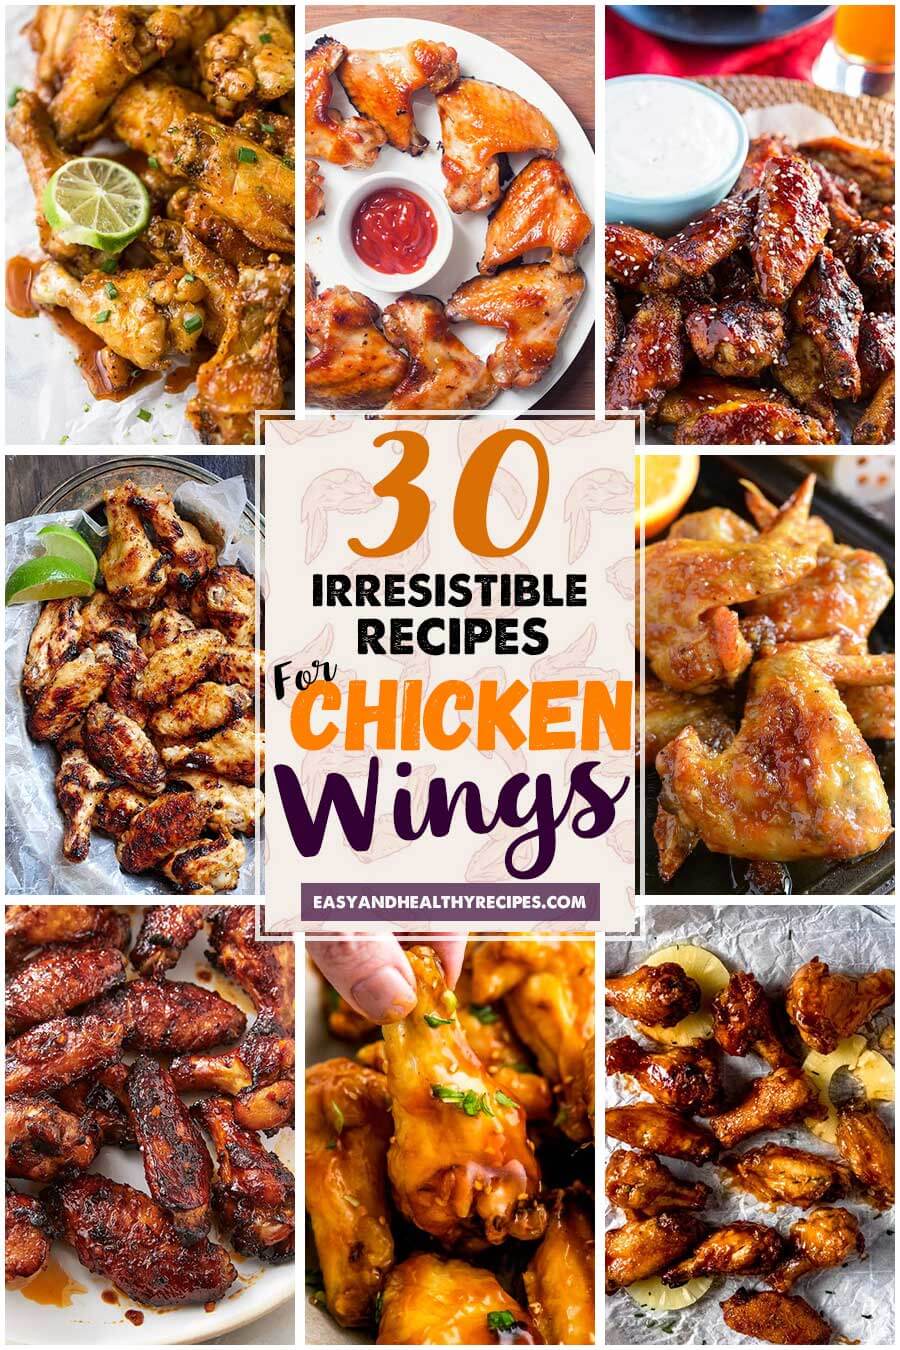 30 Irresistible Recipes For Chicken Wings